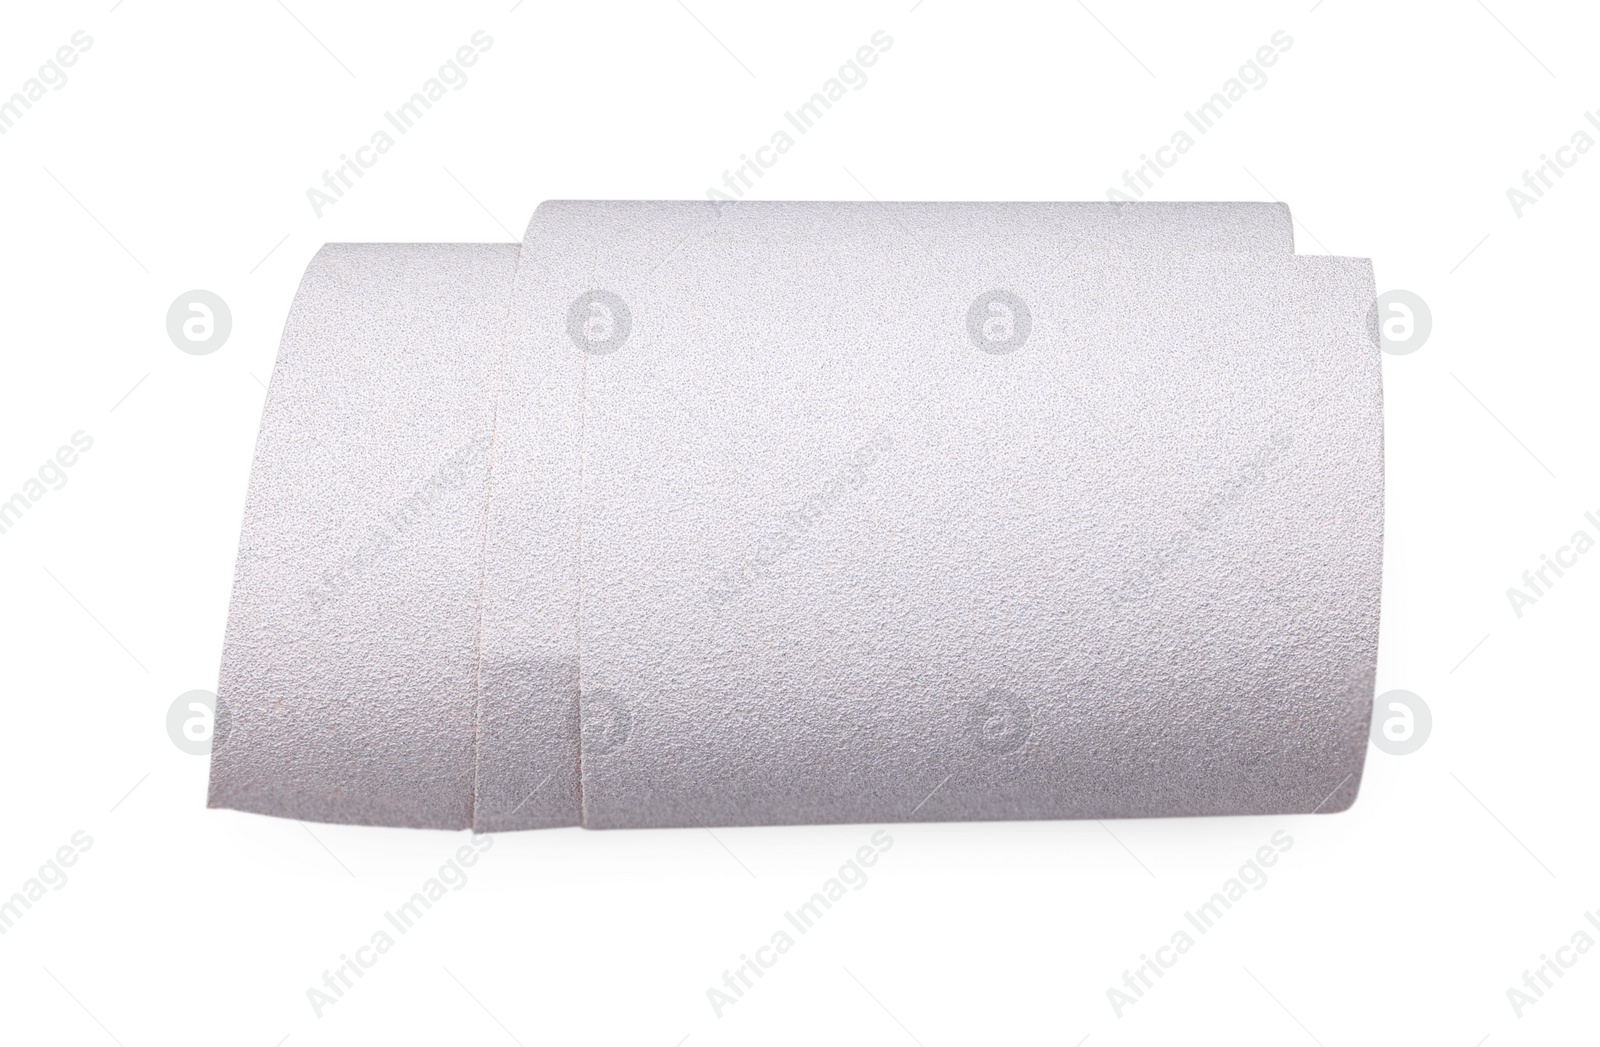 Photo of Sheet of coarse sandpaper isolated on white